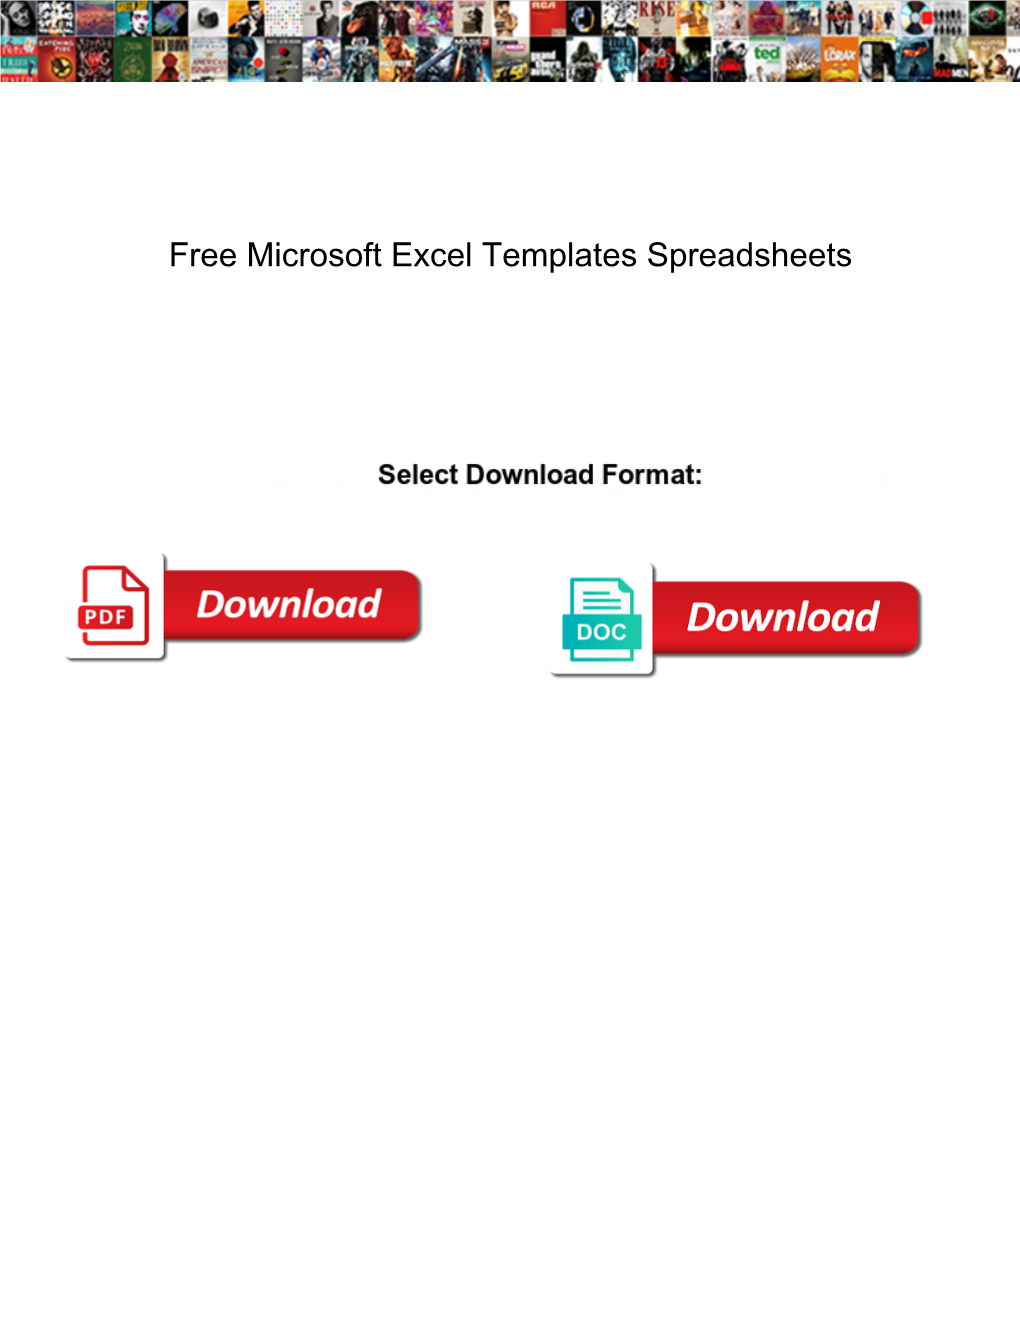 Free Microsoft Excel Templates Spreadsheets